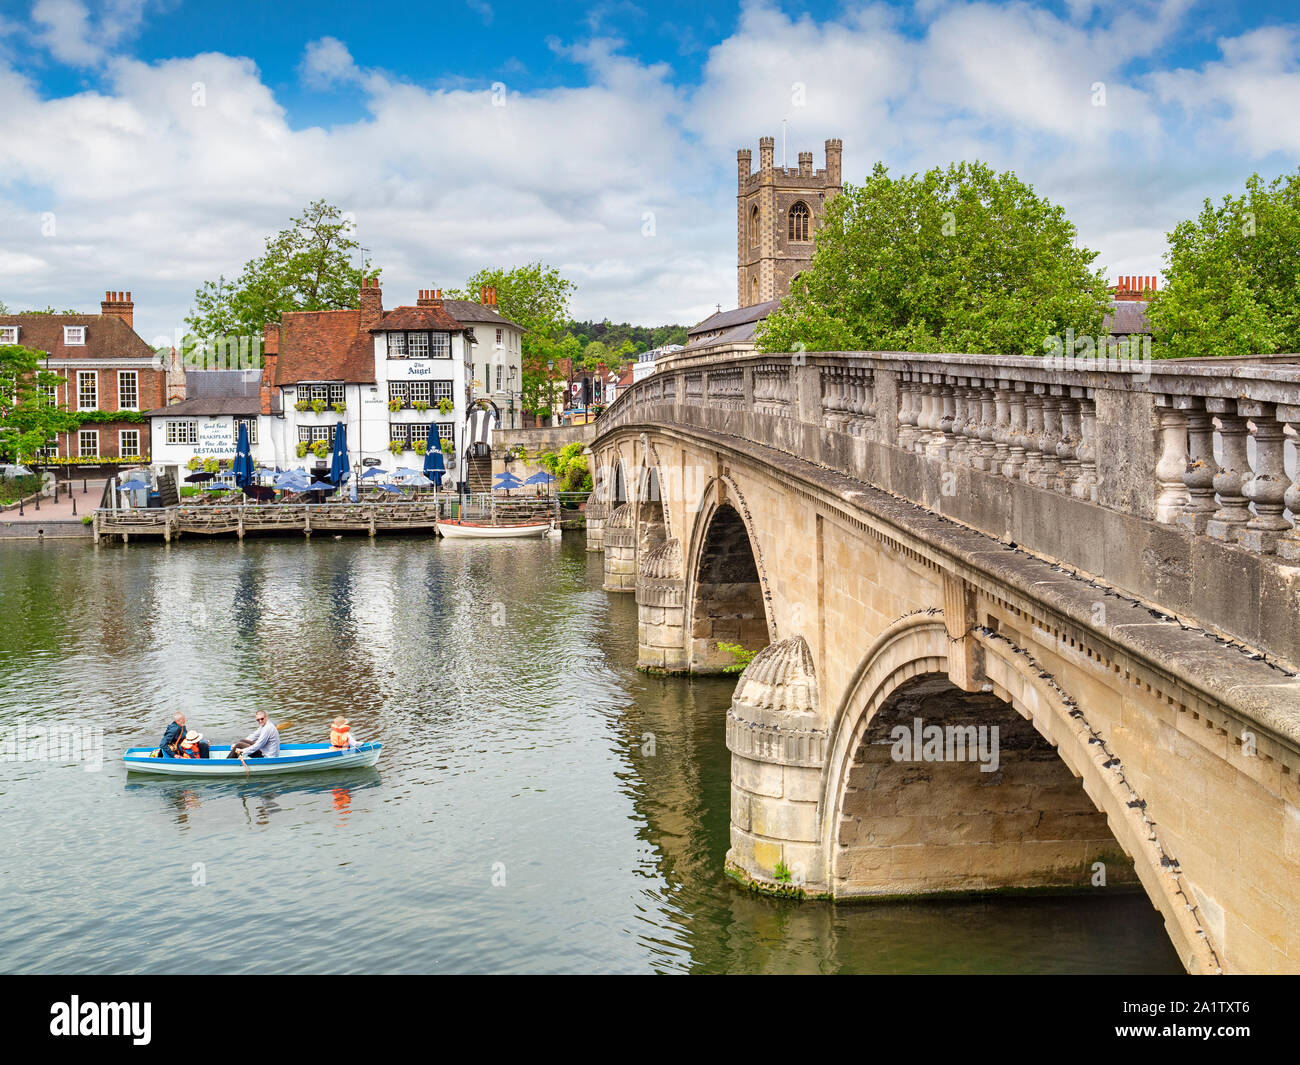 4 June 2019: Henley on Thames, UK - Henley Bridge and the River Thames, with The Angel riverside pub and restaurant, family in rowing boat on river. Stock Photo